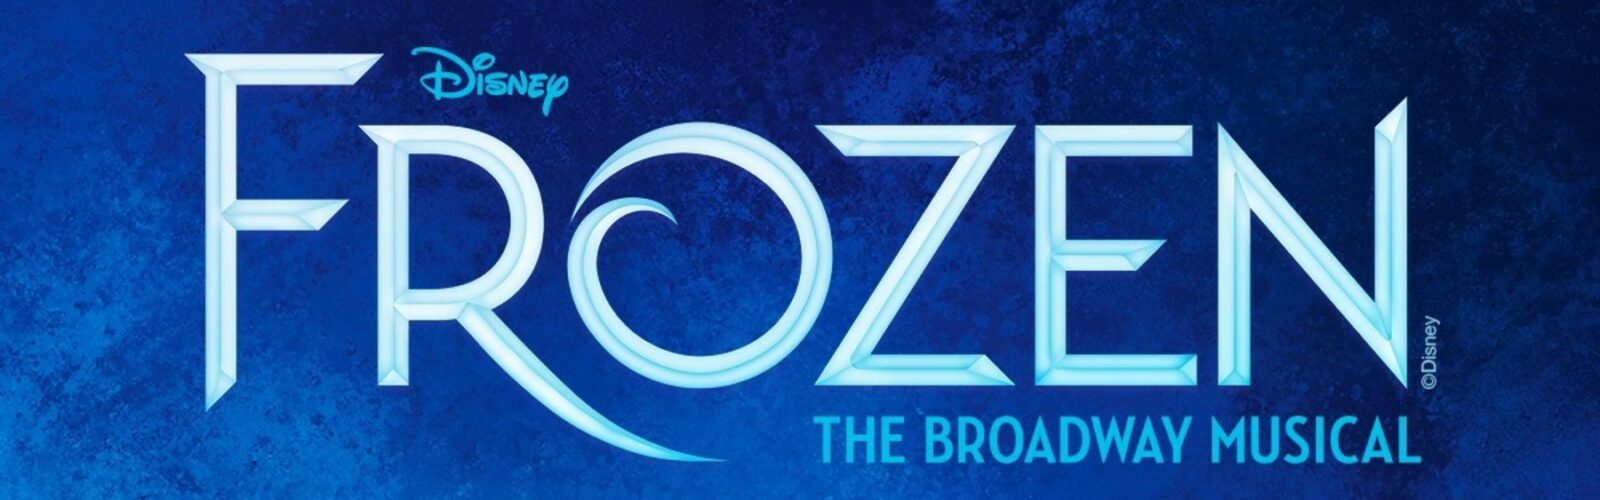 Go See This: JMArts presents Frozen: The Broadway Musical